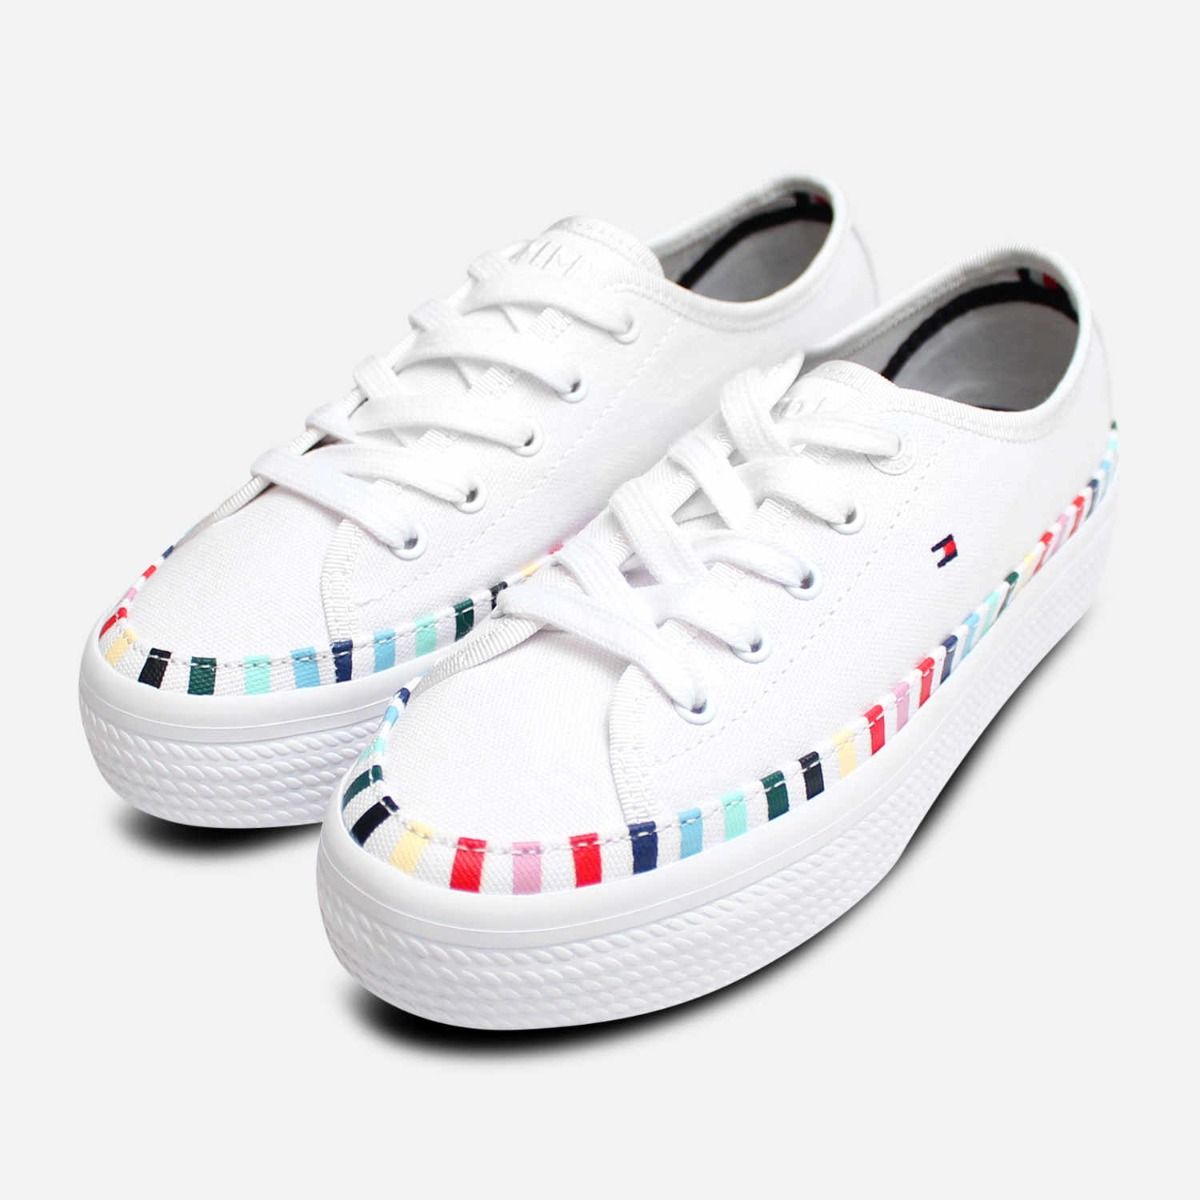 Tommy Hilfiger Flatform Womens White Cotton Trainers Ladies Sport Casual Shoes 